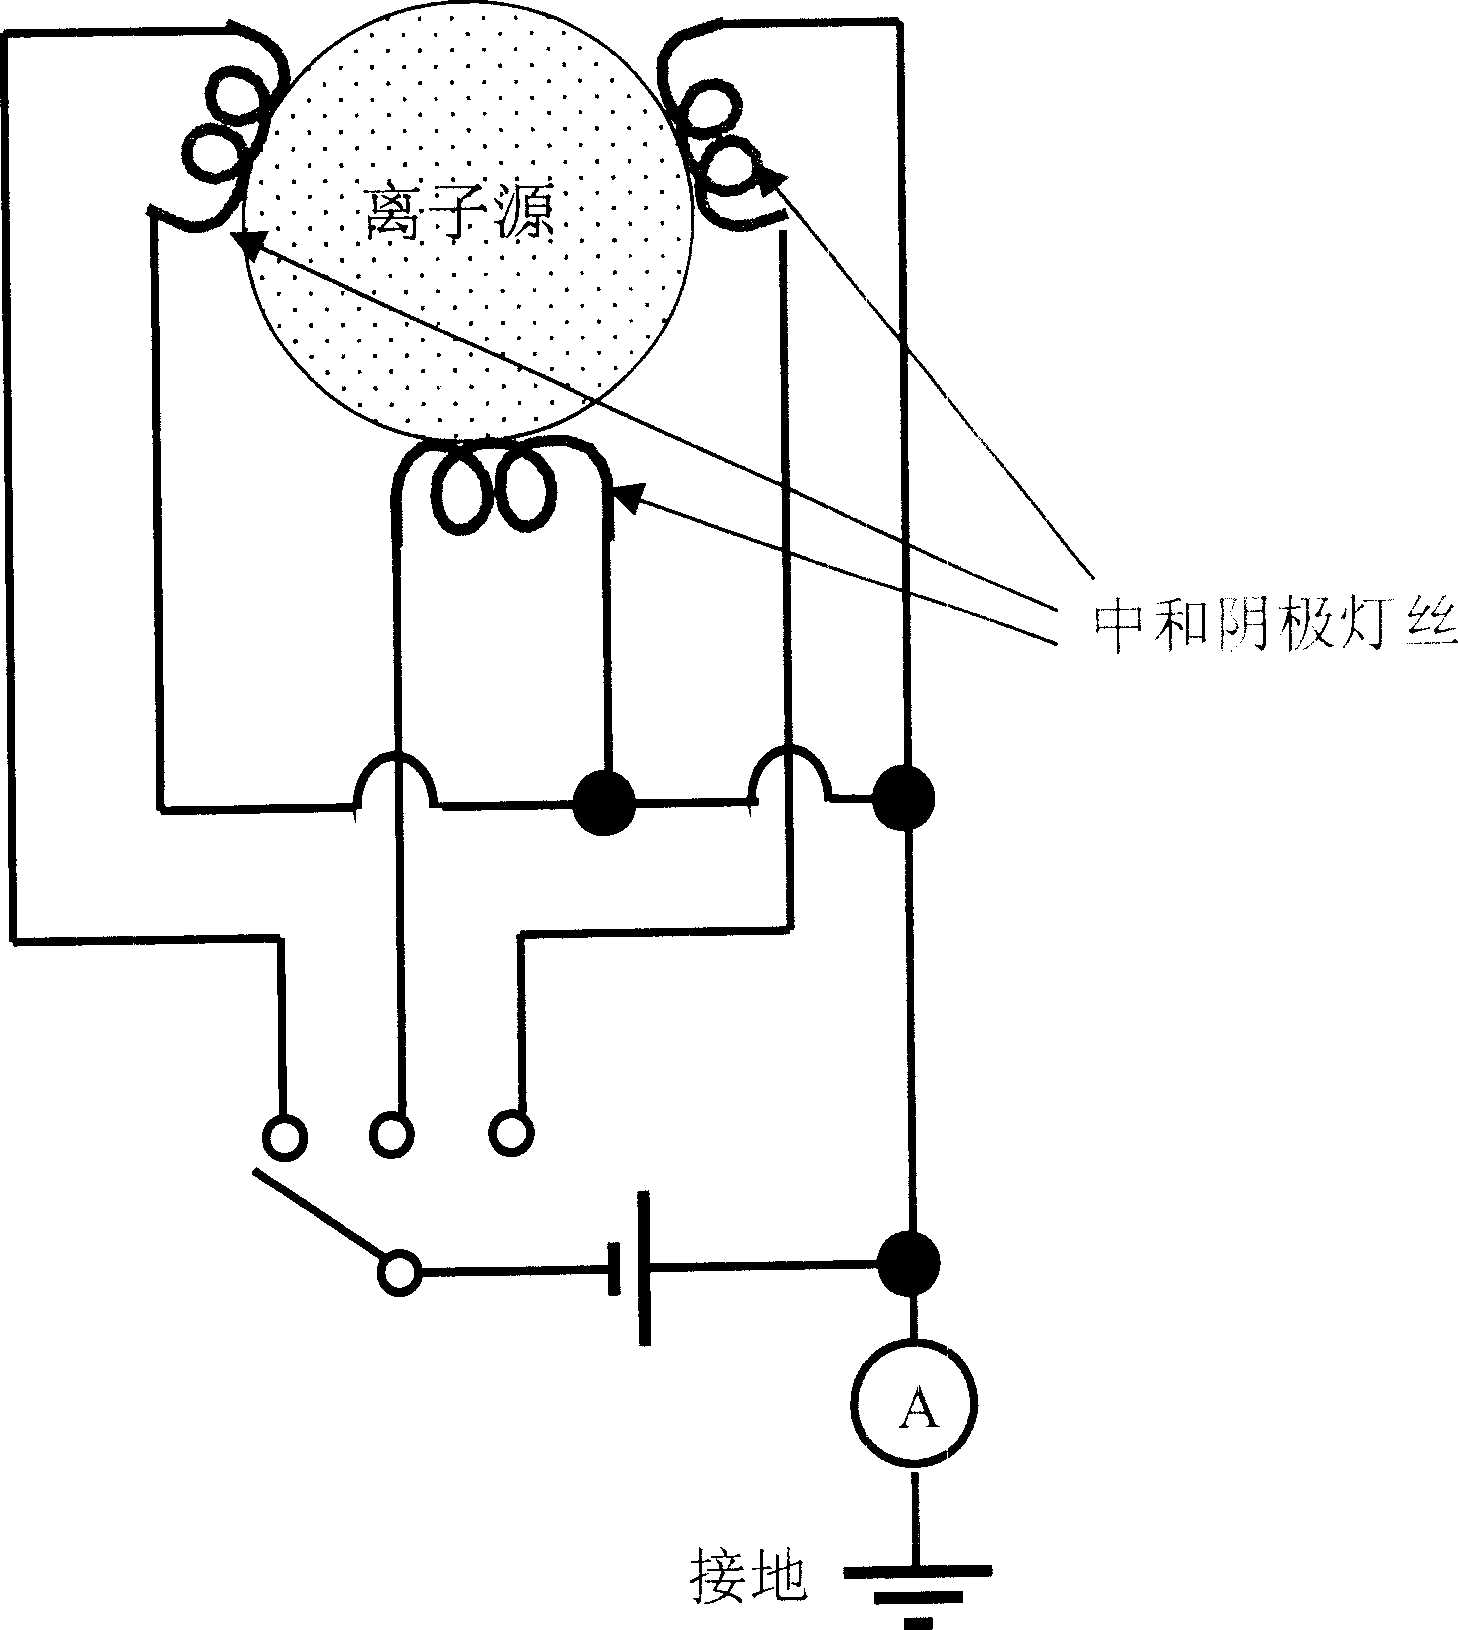 Filament of neutralization cathode in Kaufman ion source, and method